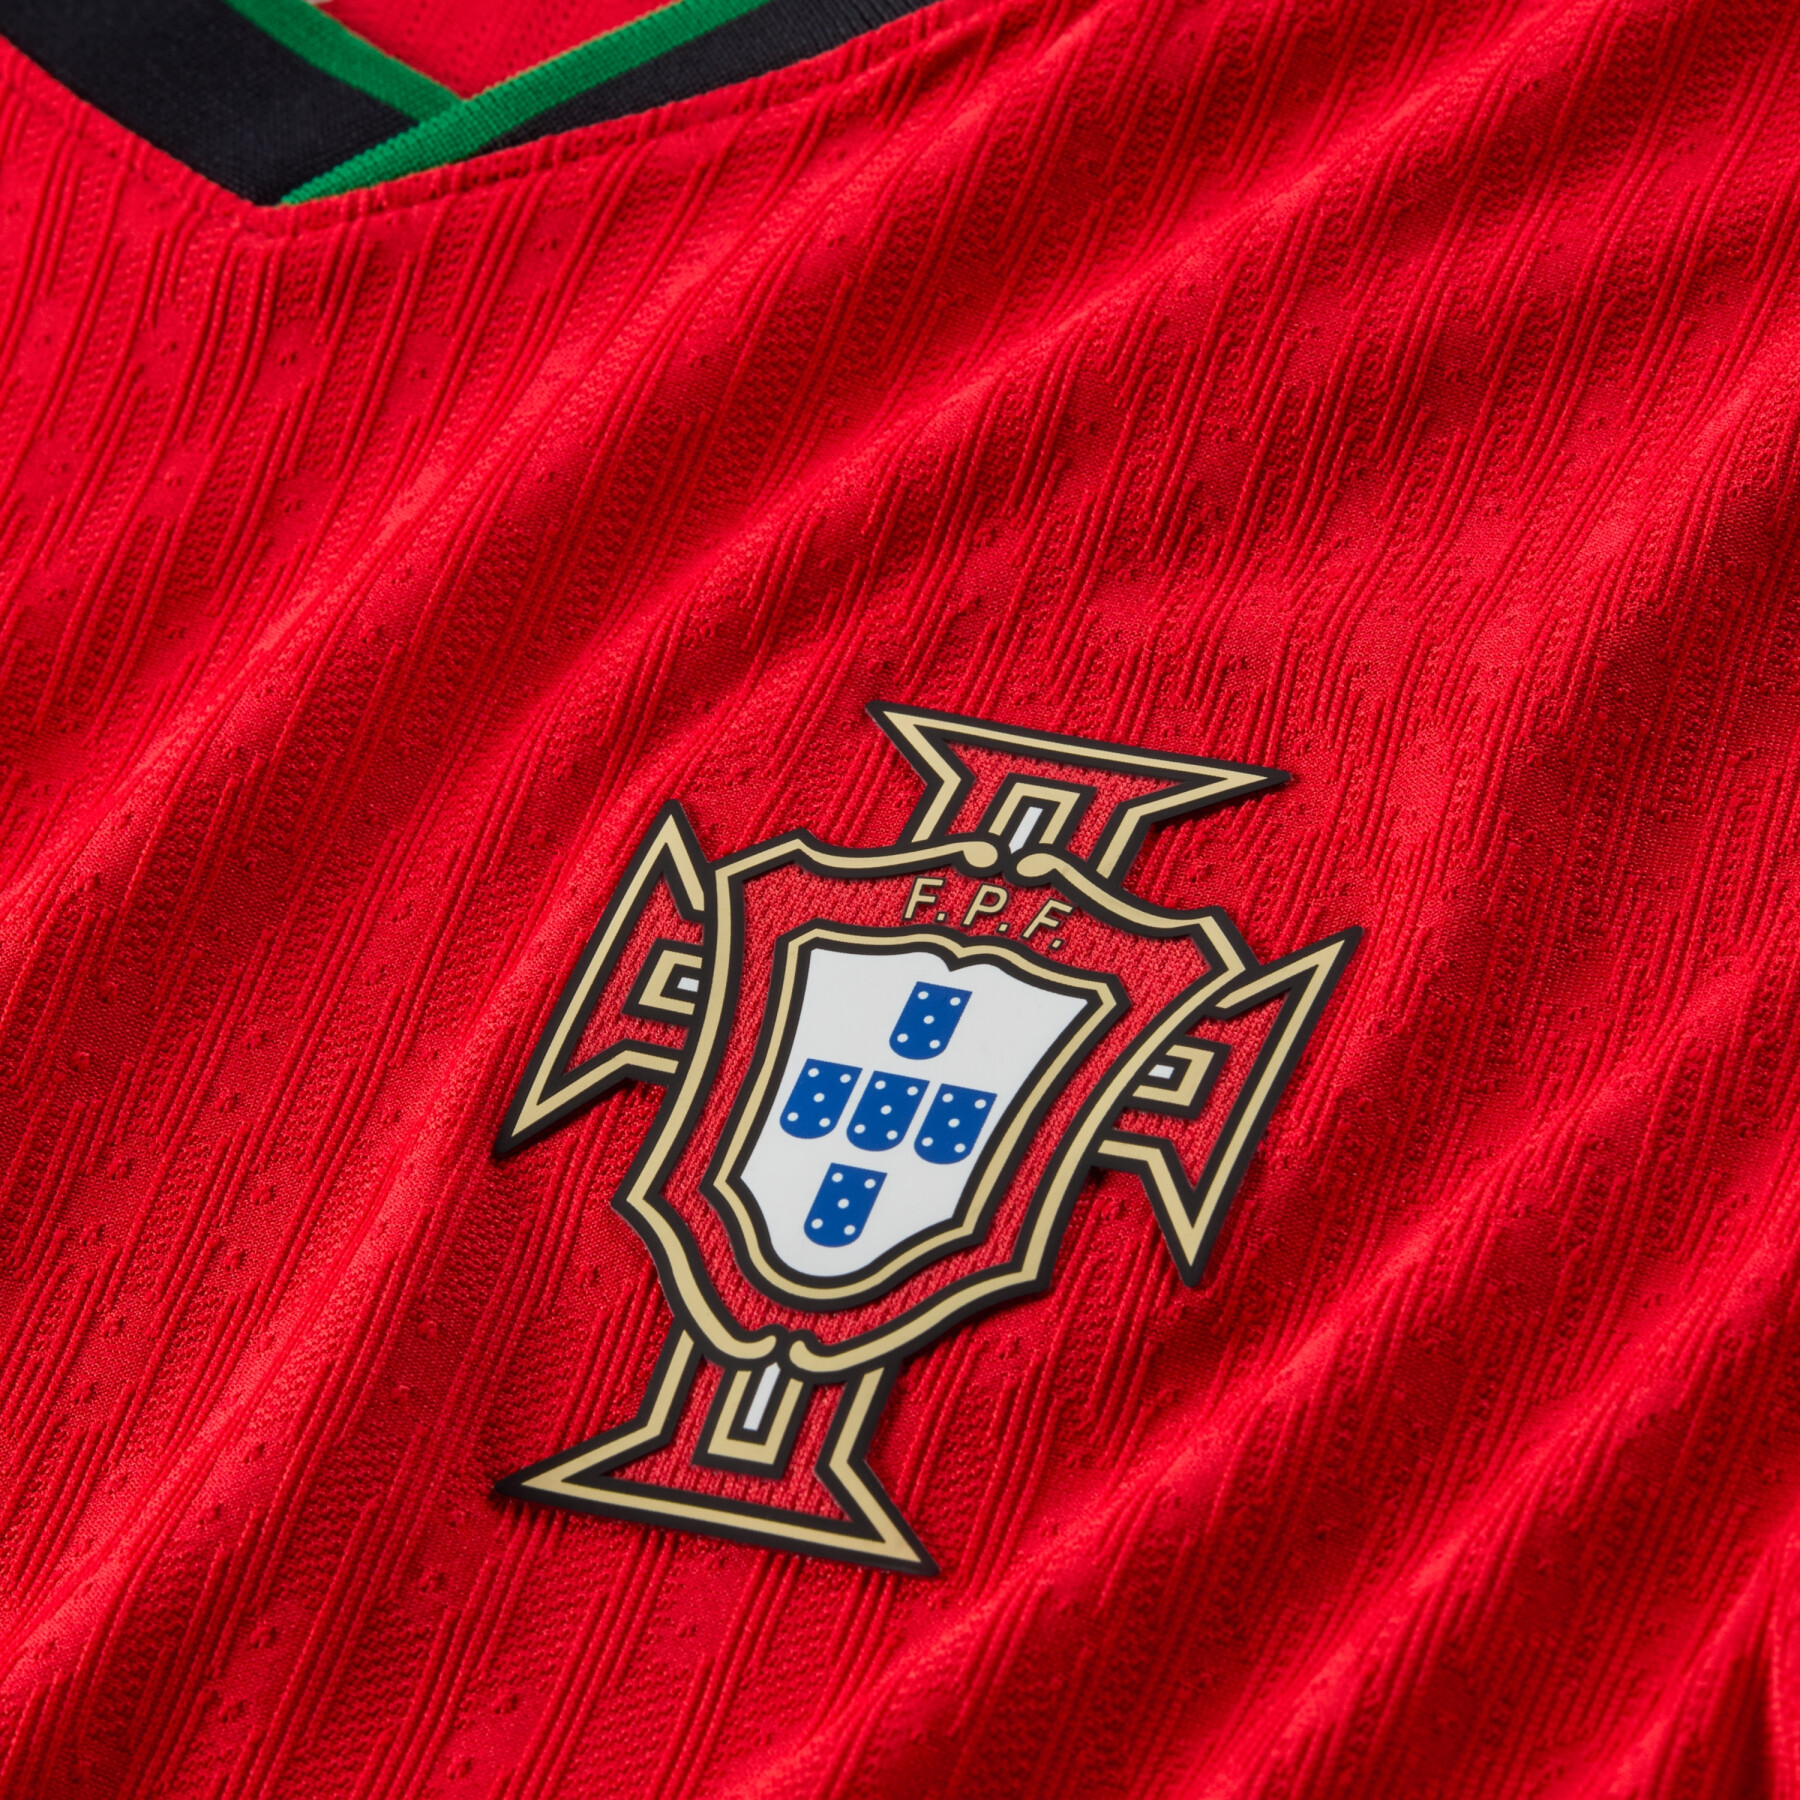 Authentic home jersey Portugal Euro 2024